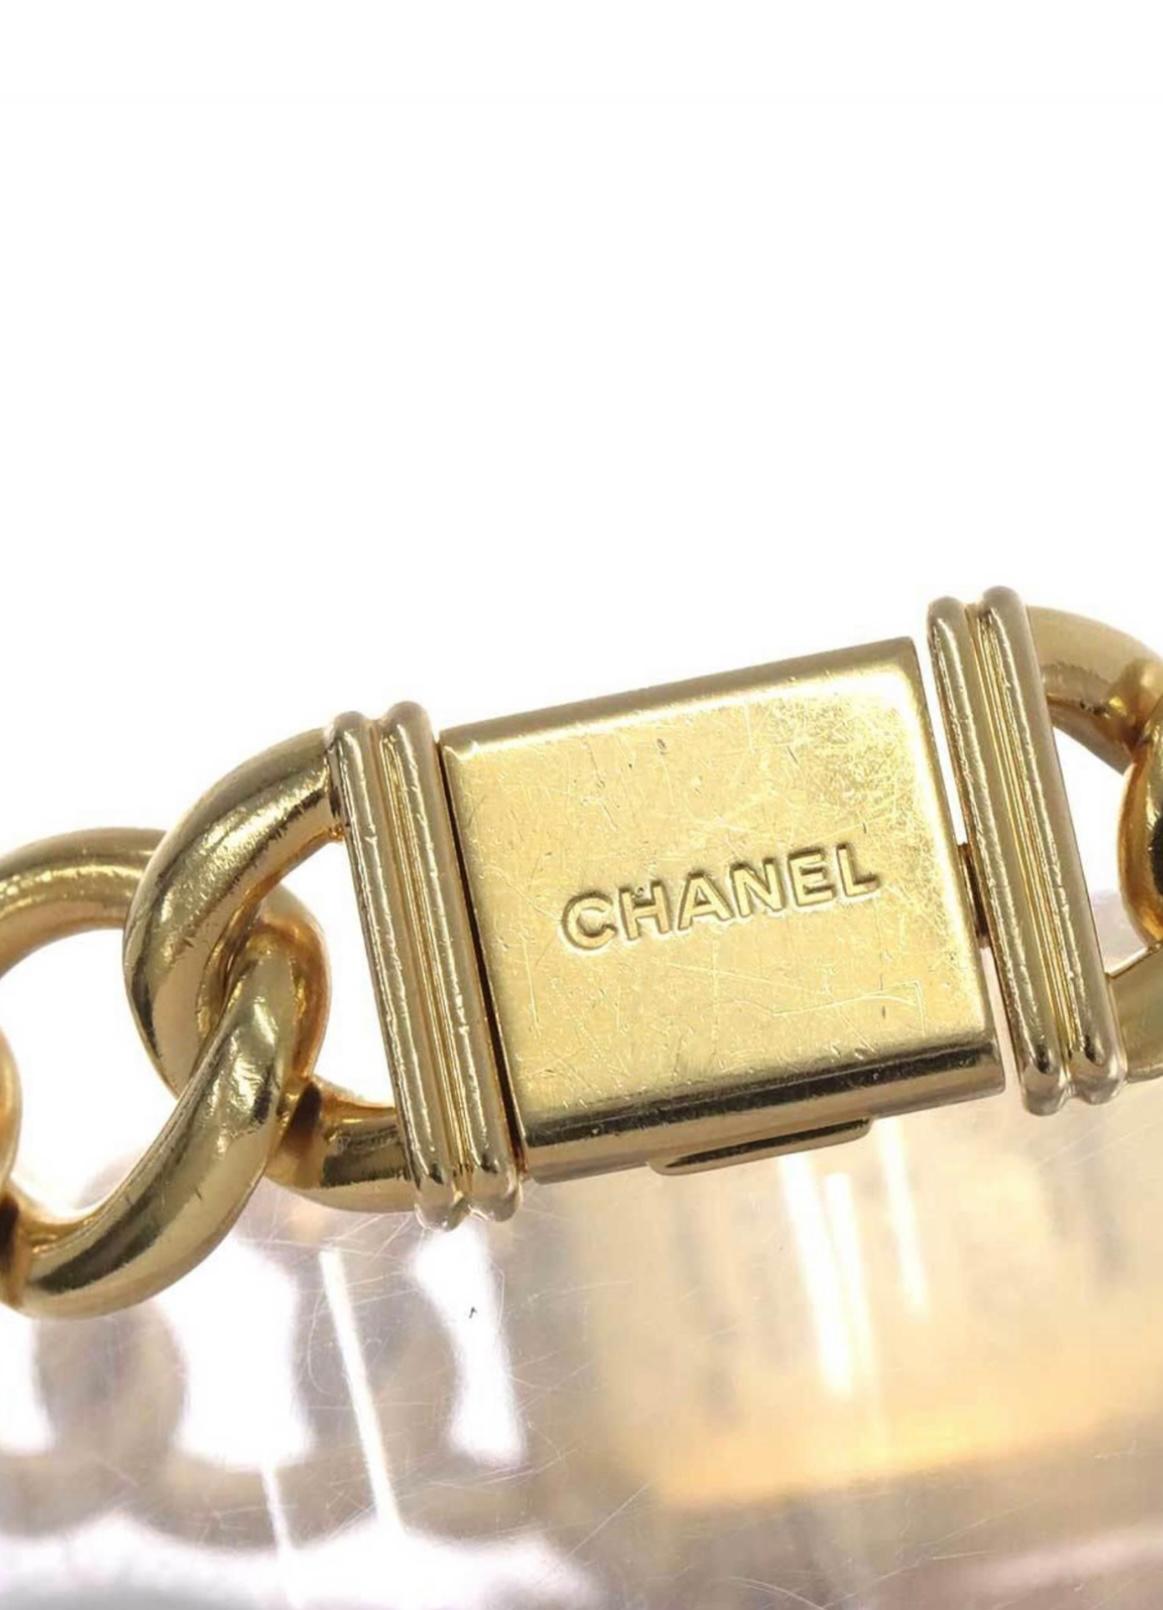 Brand: Chanel

Model: Premier

Case Material: Yellow Gold

Dial: Black Lacquered

Movement: Quartz

Weight:  76.3 grams

Bracelet size: 14.6 cm

Accessories: Brilliance Jewels Two-year Warranty

Chanel Box